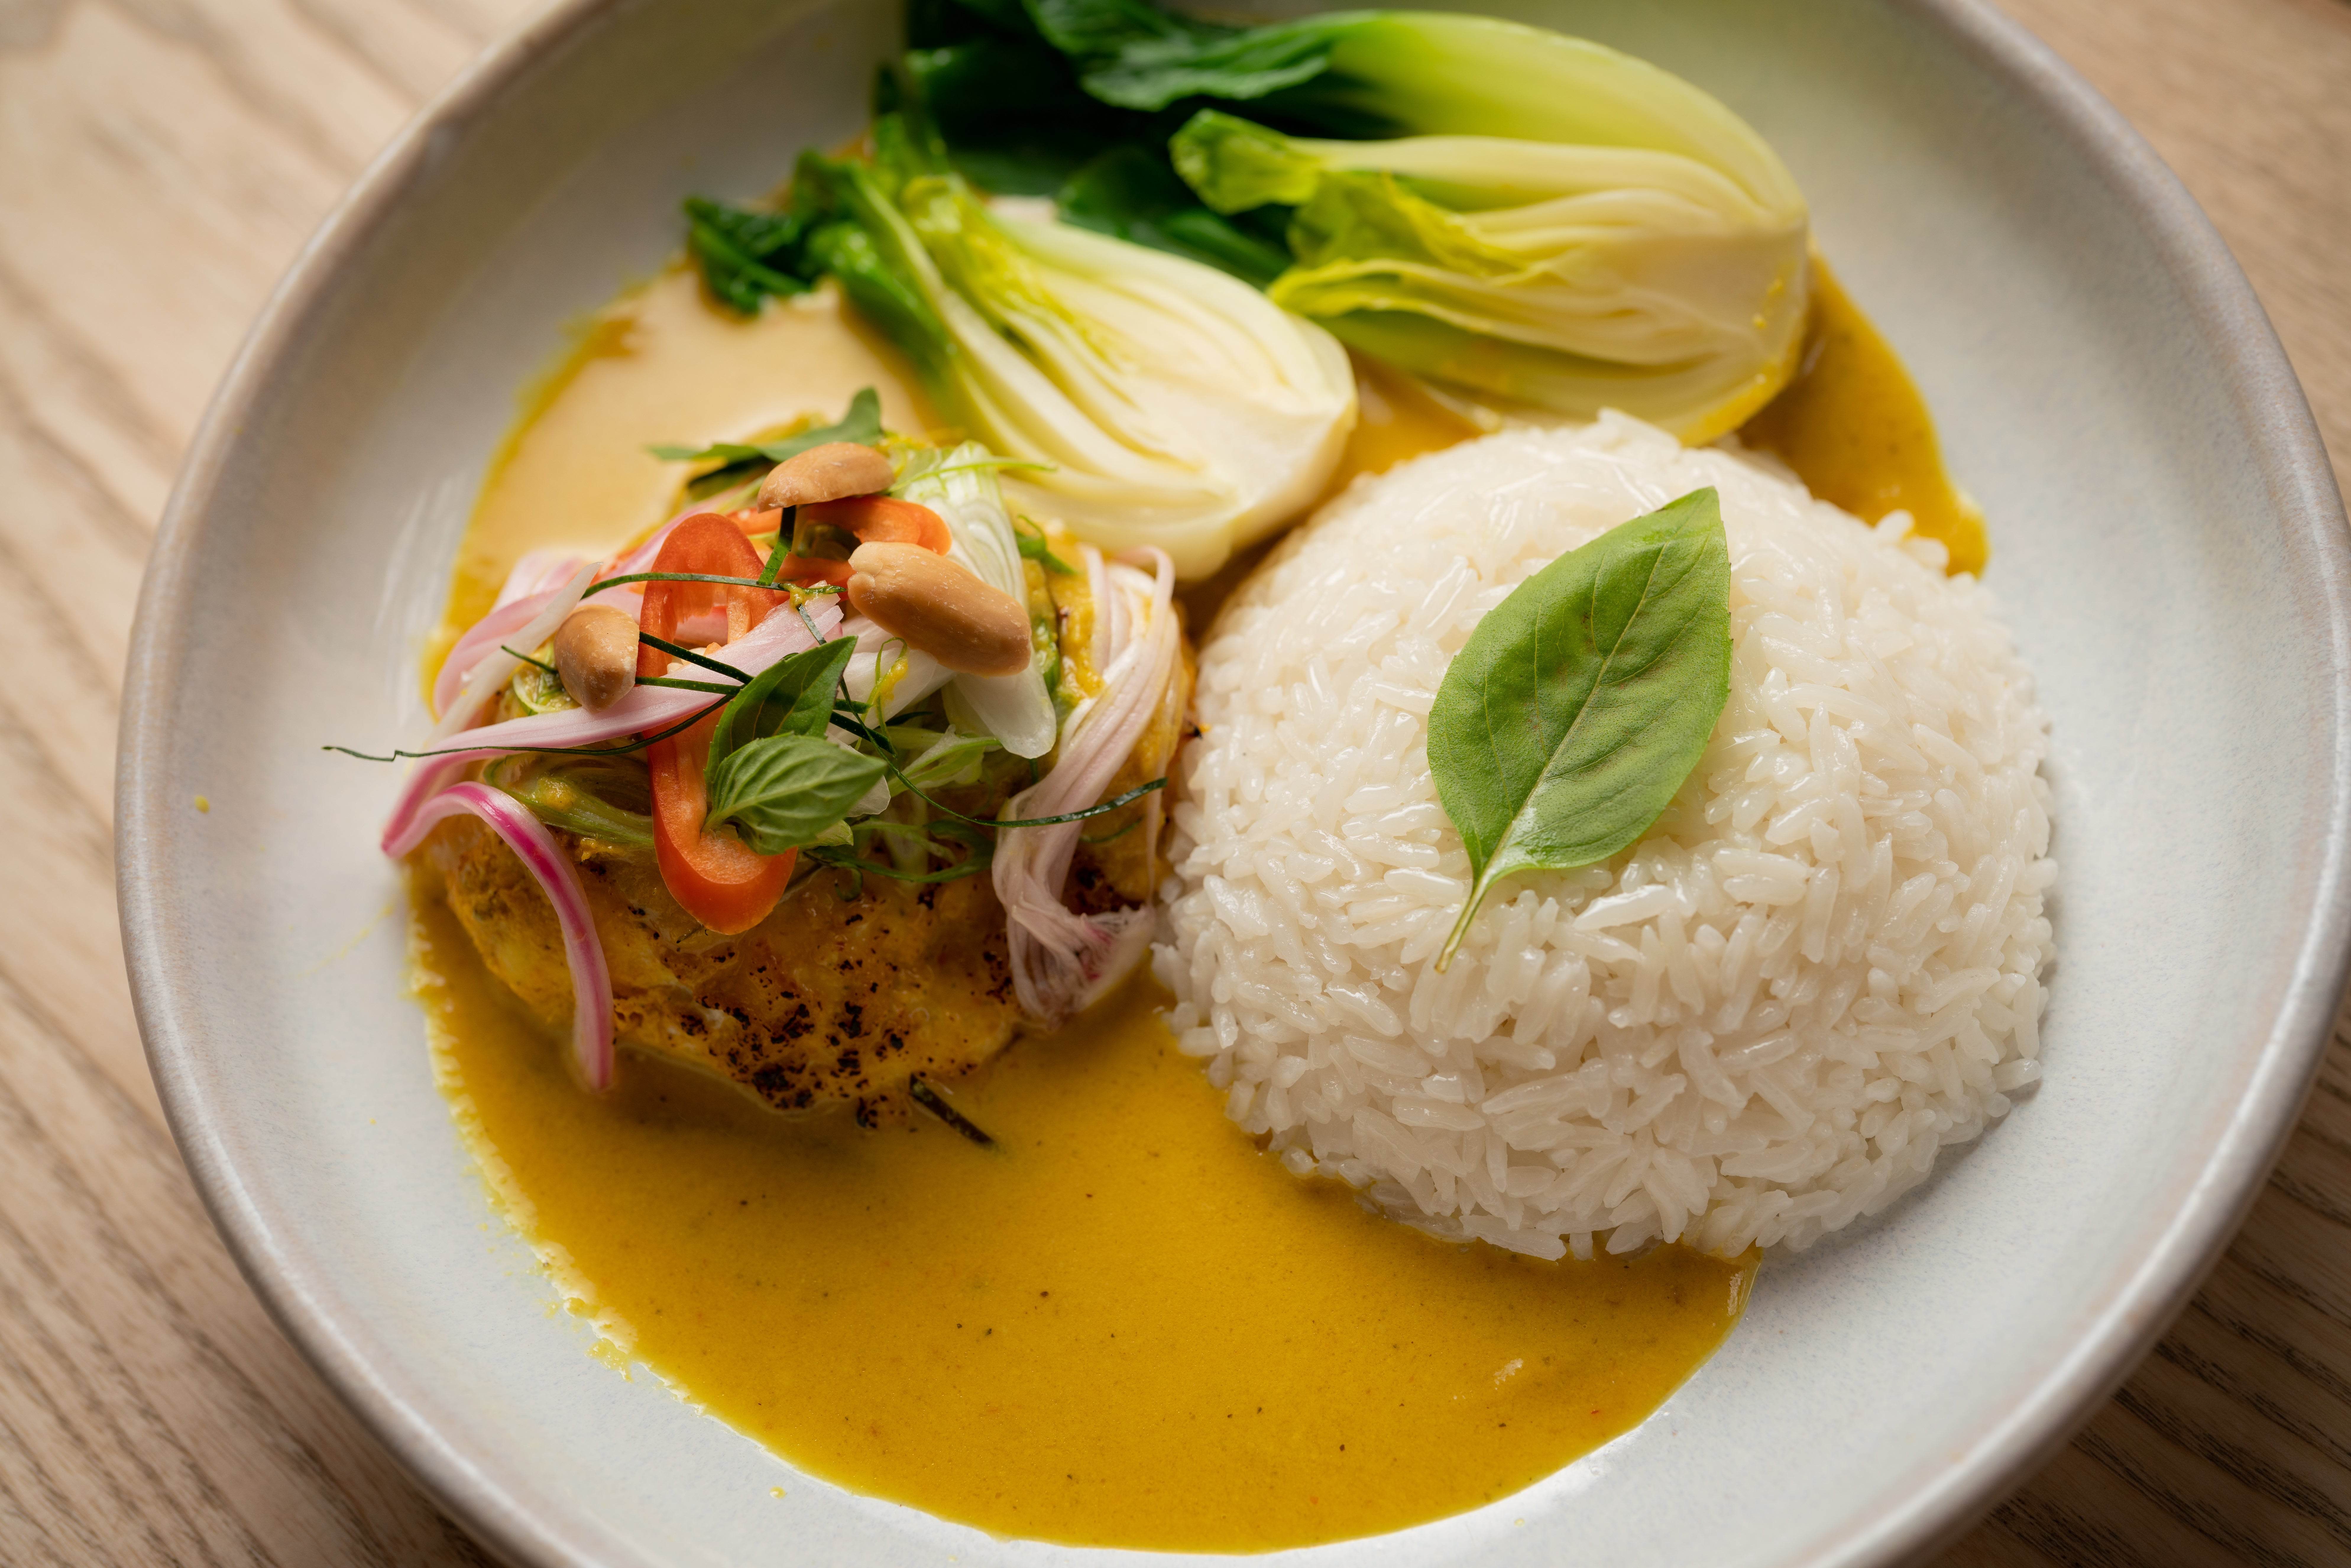 That monkfish curry of dreams